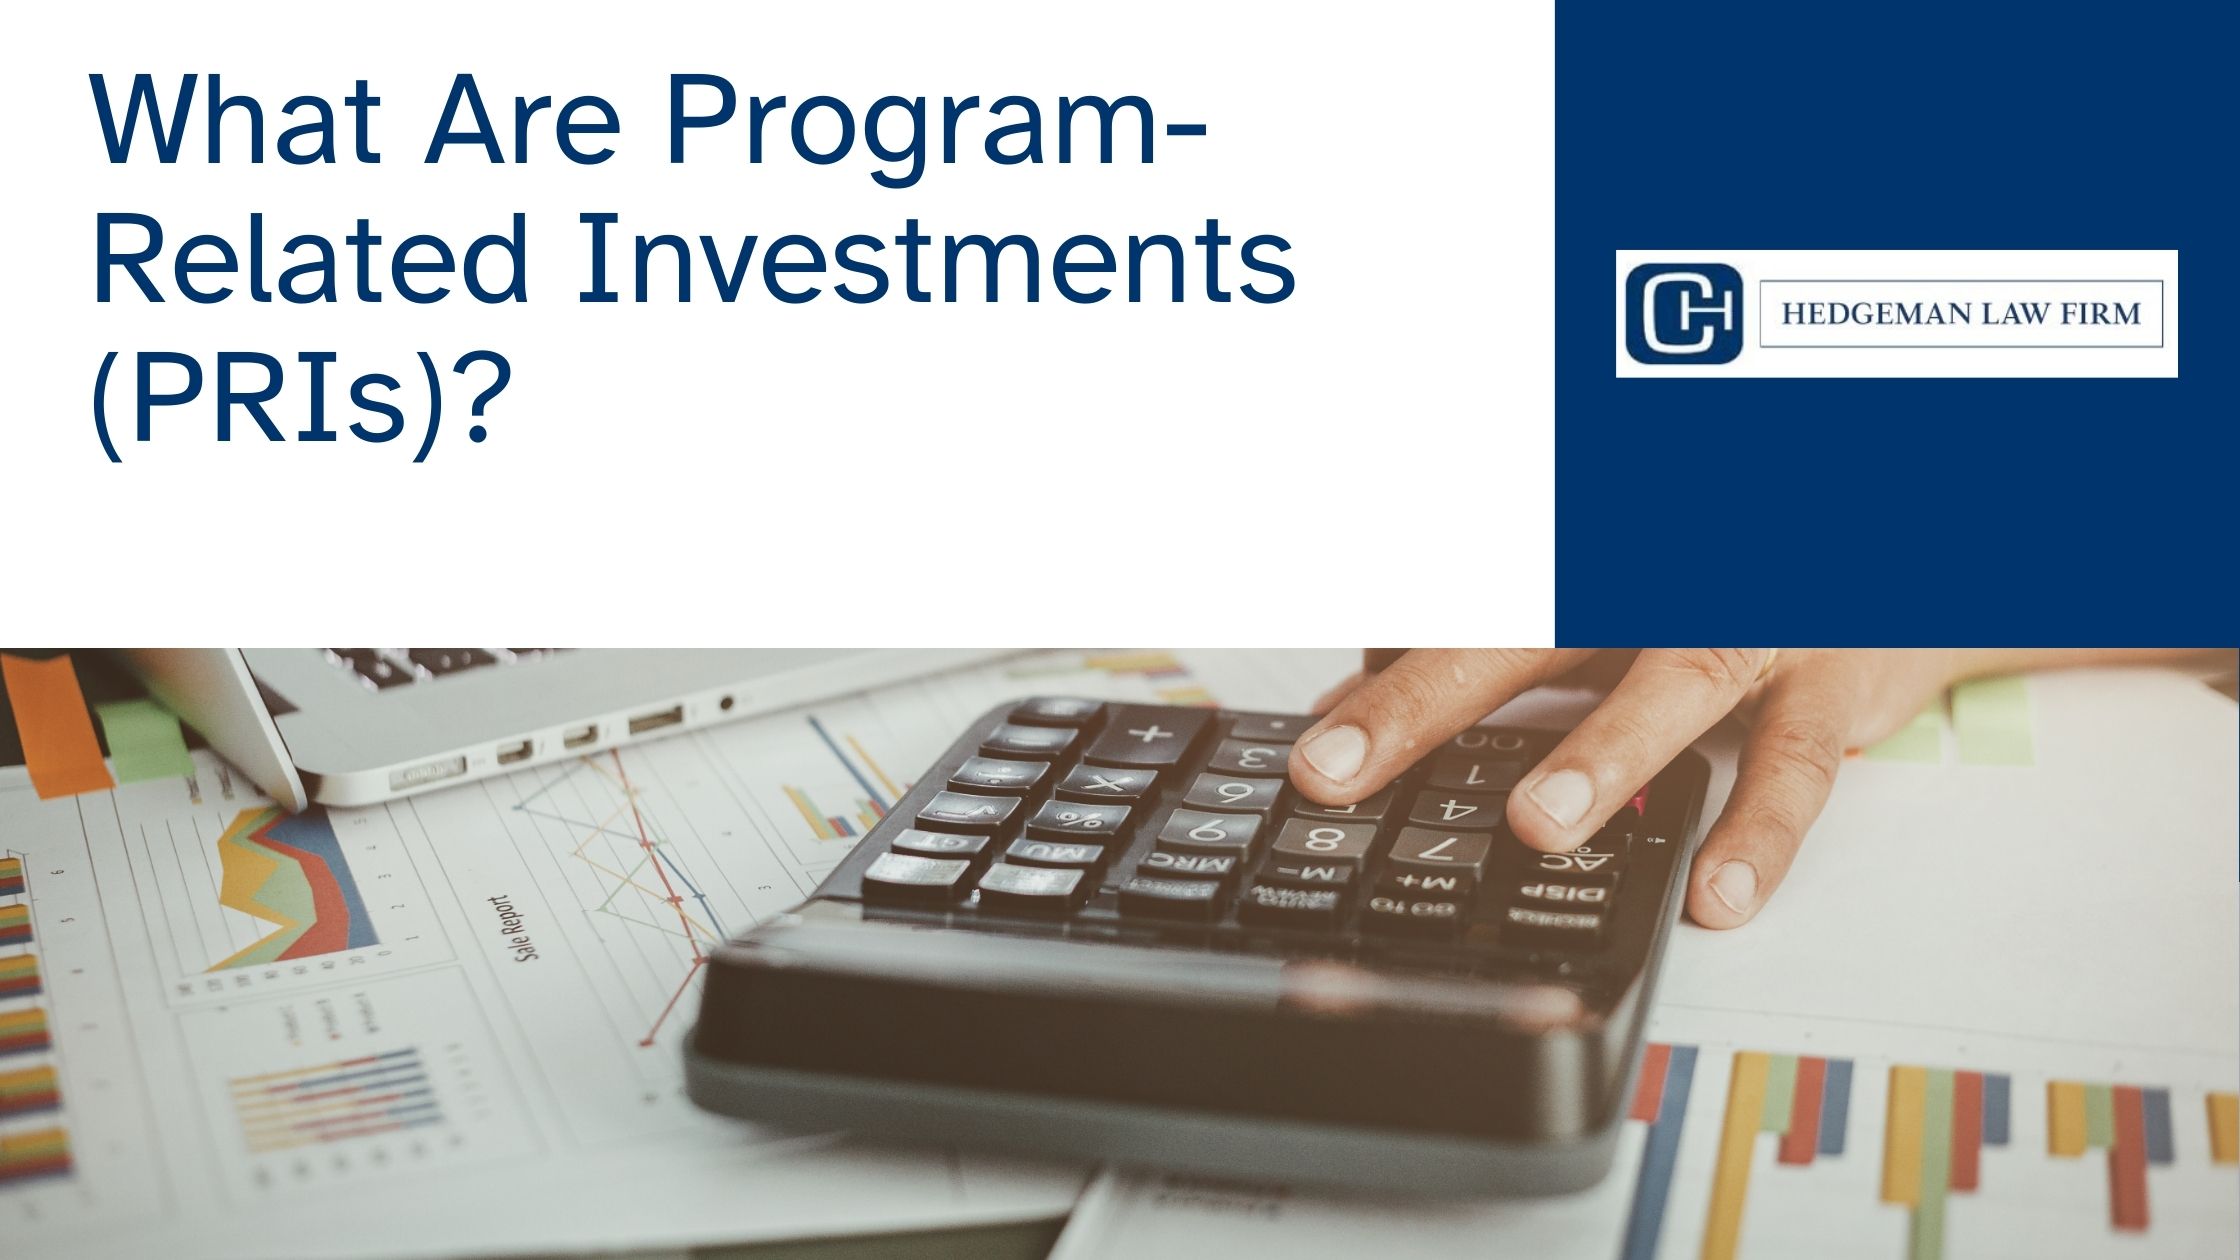 Program-Related Investments